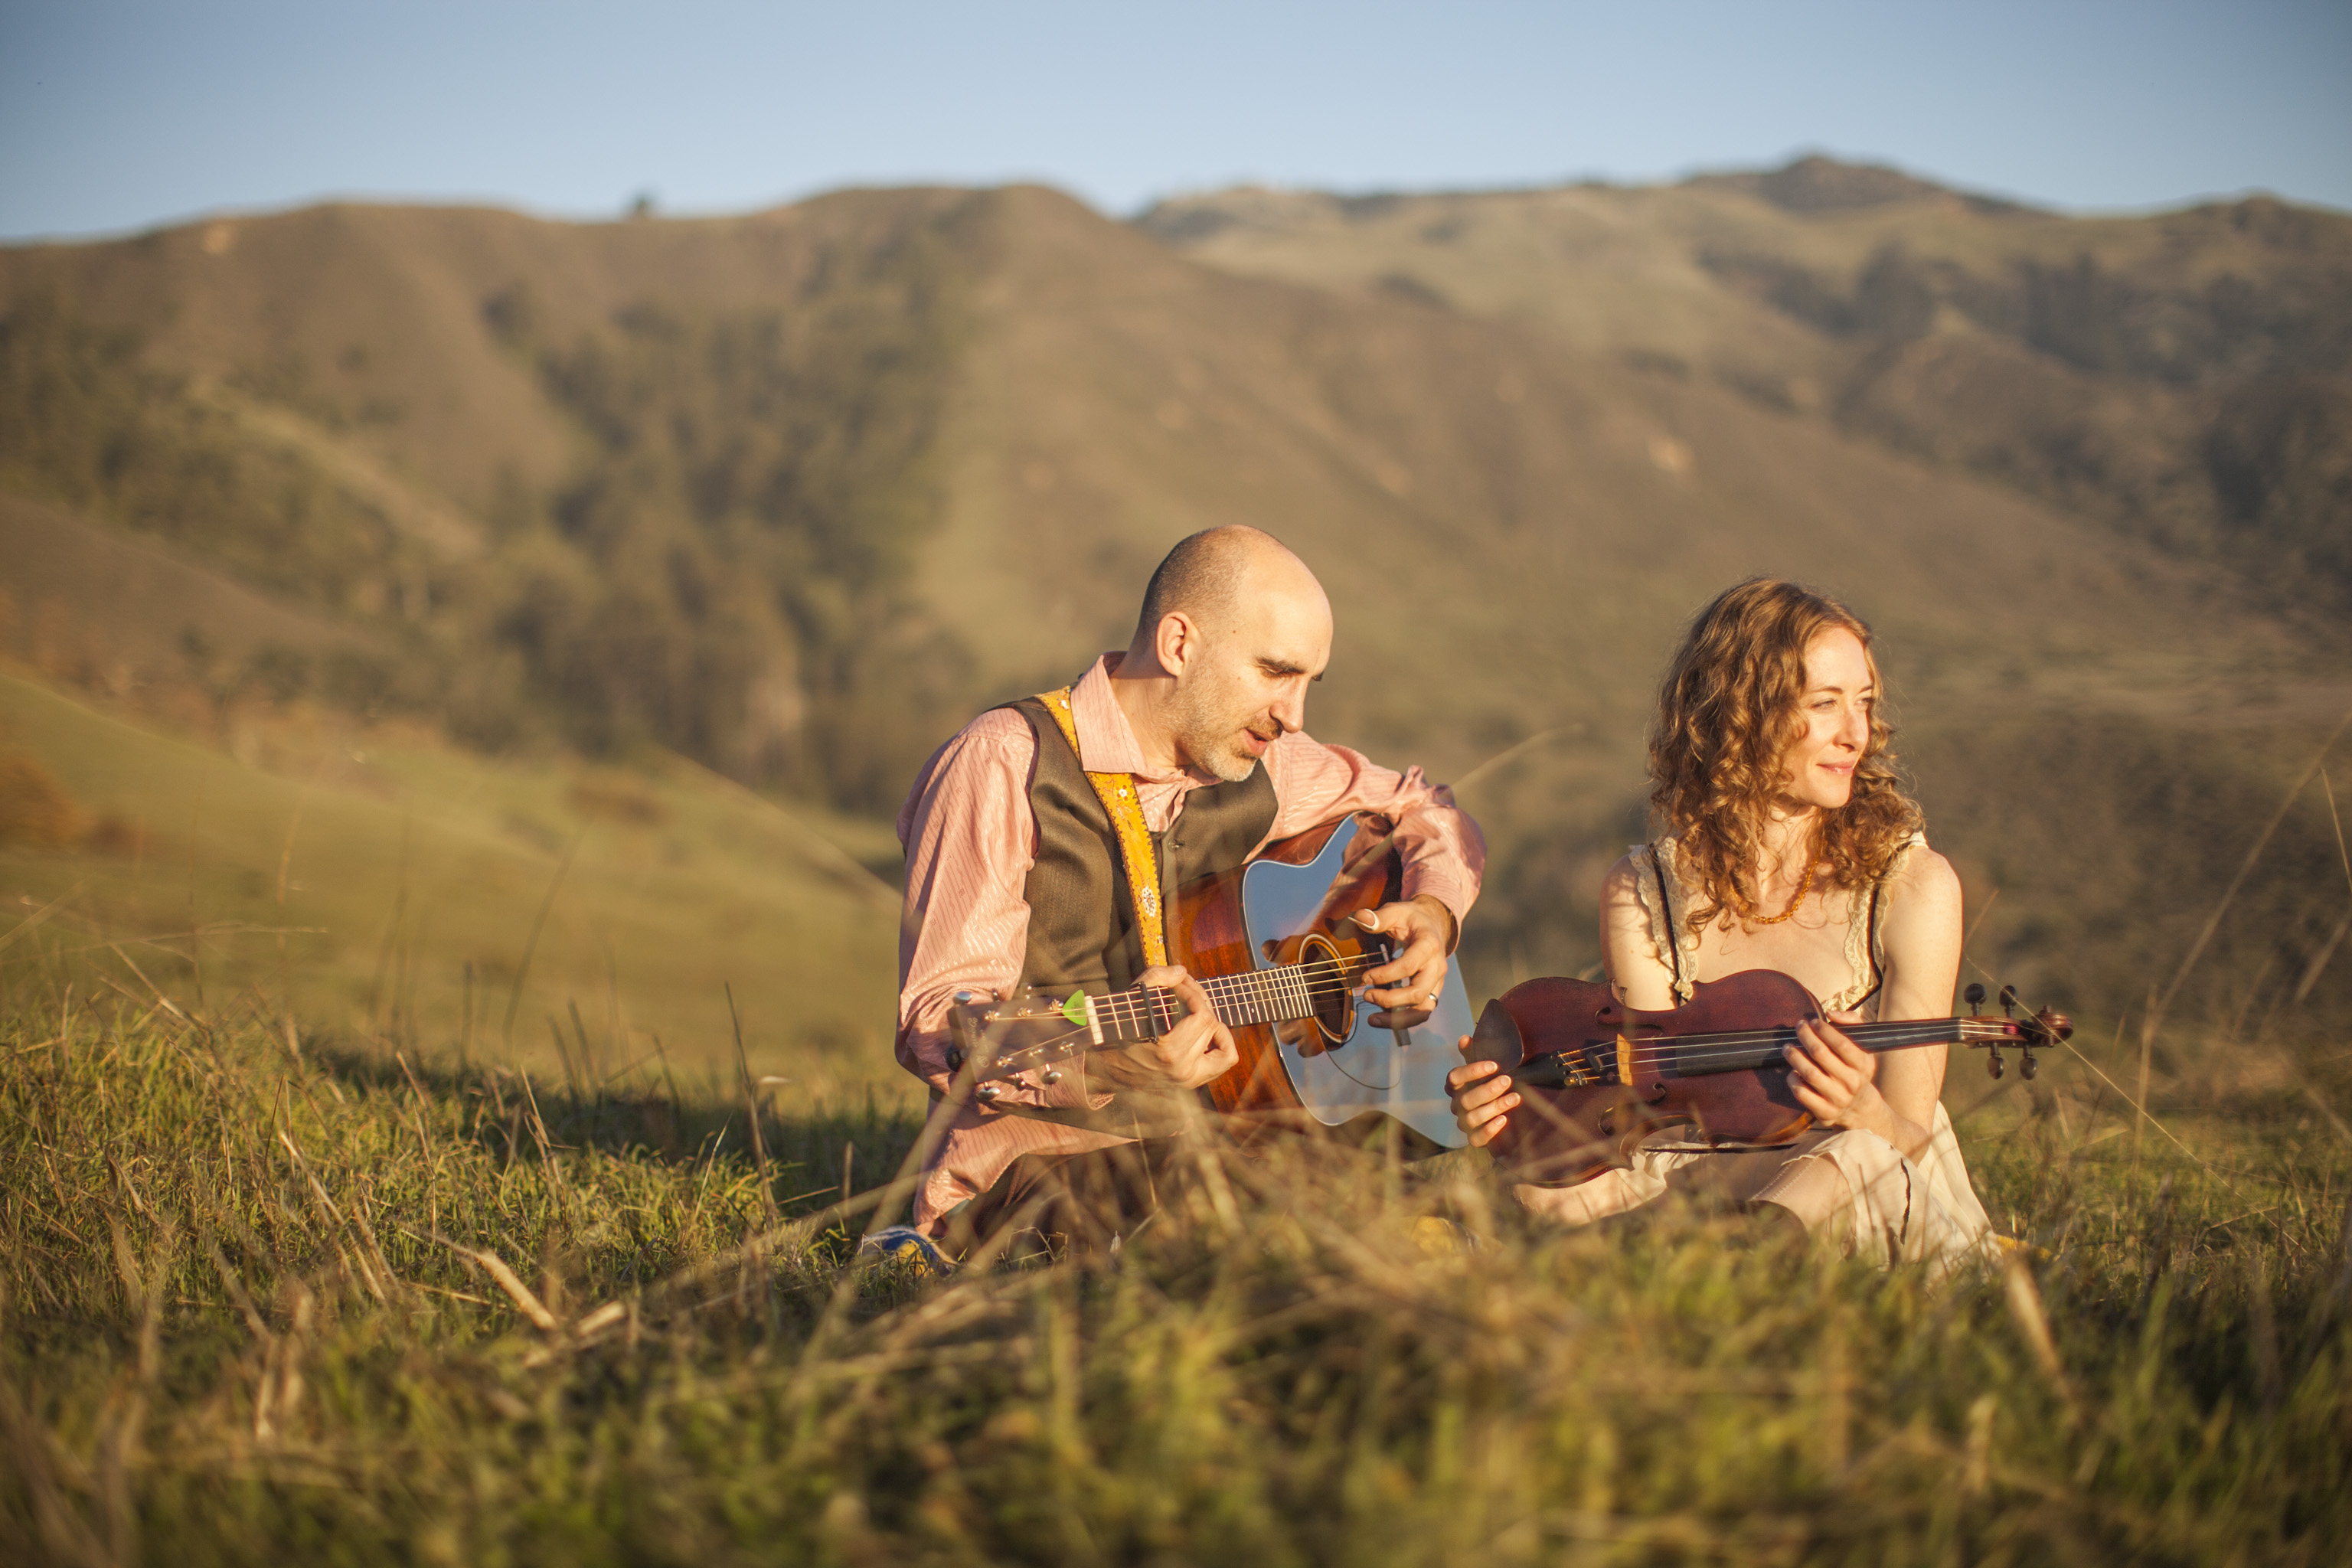 Dan Frechette & Laurel Thomsen posing with their violin and guitar in a field